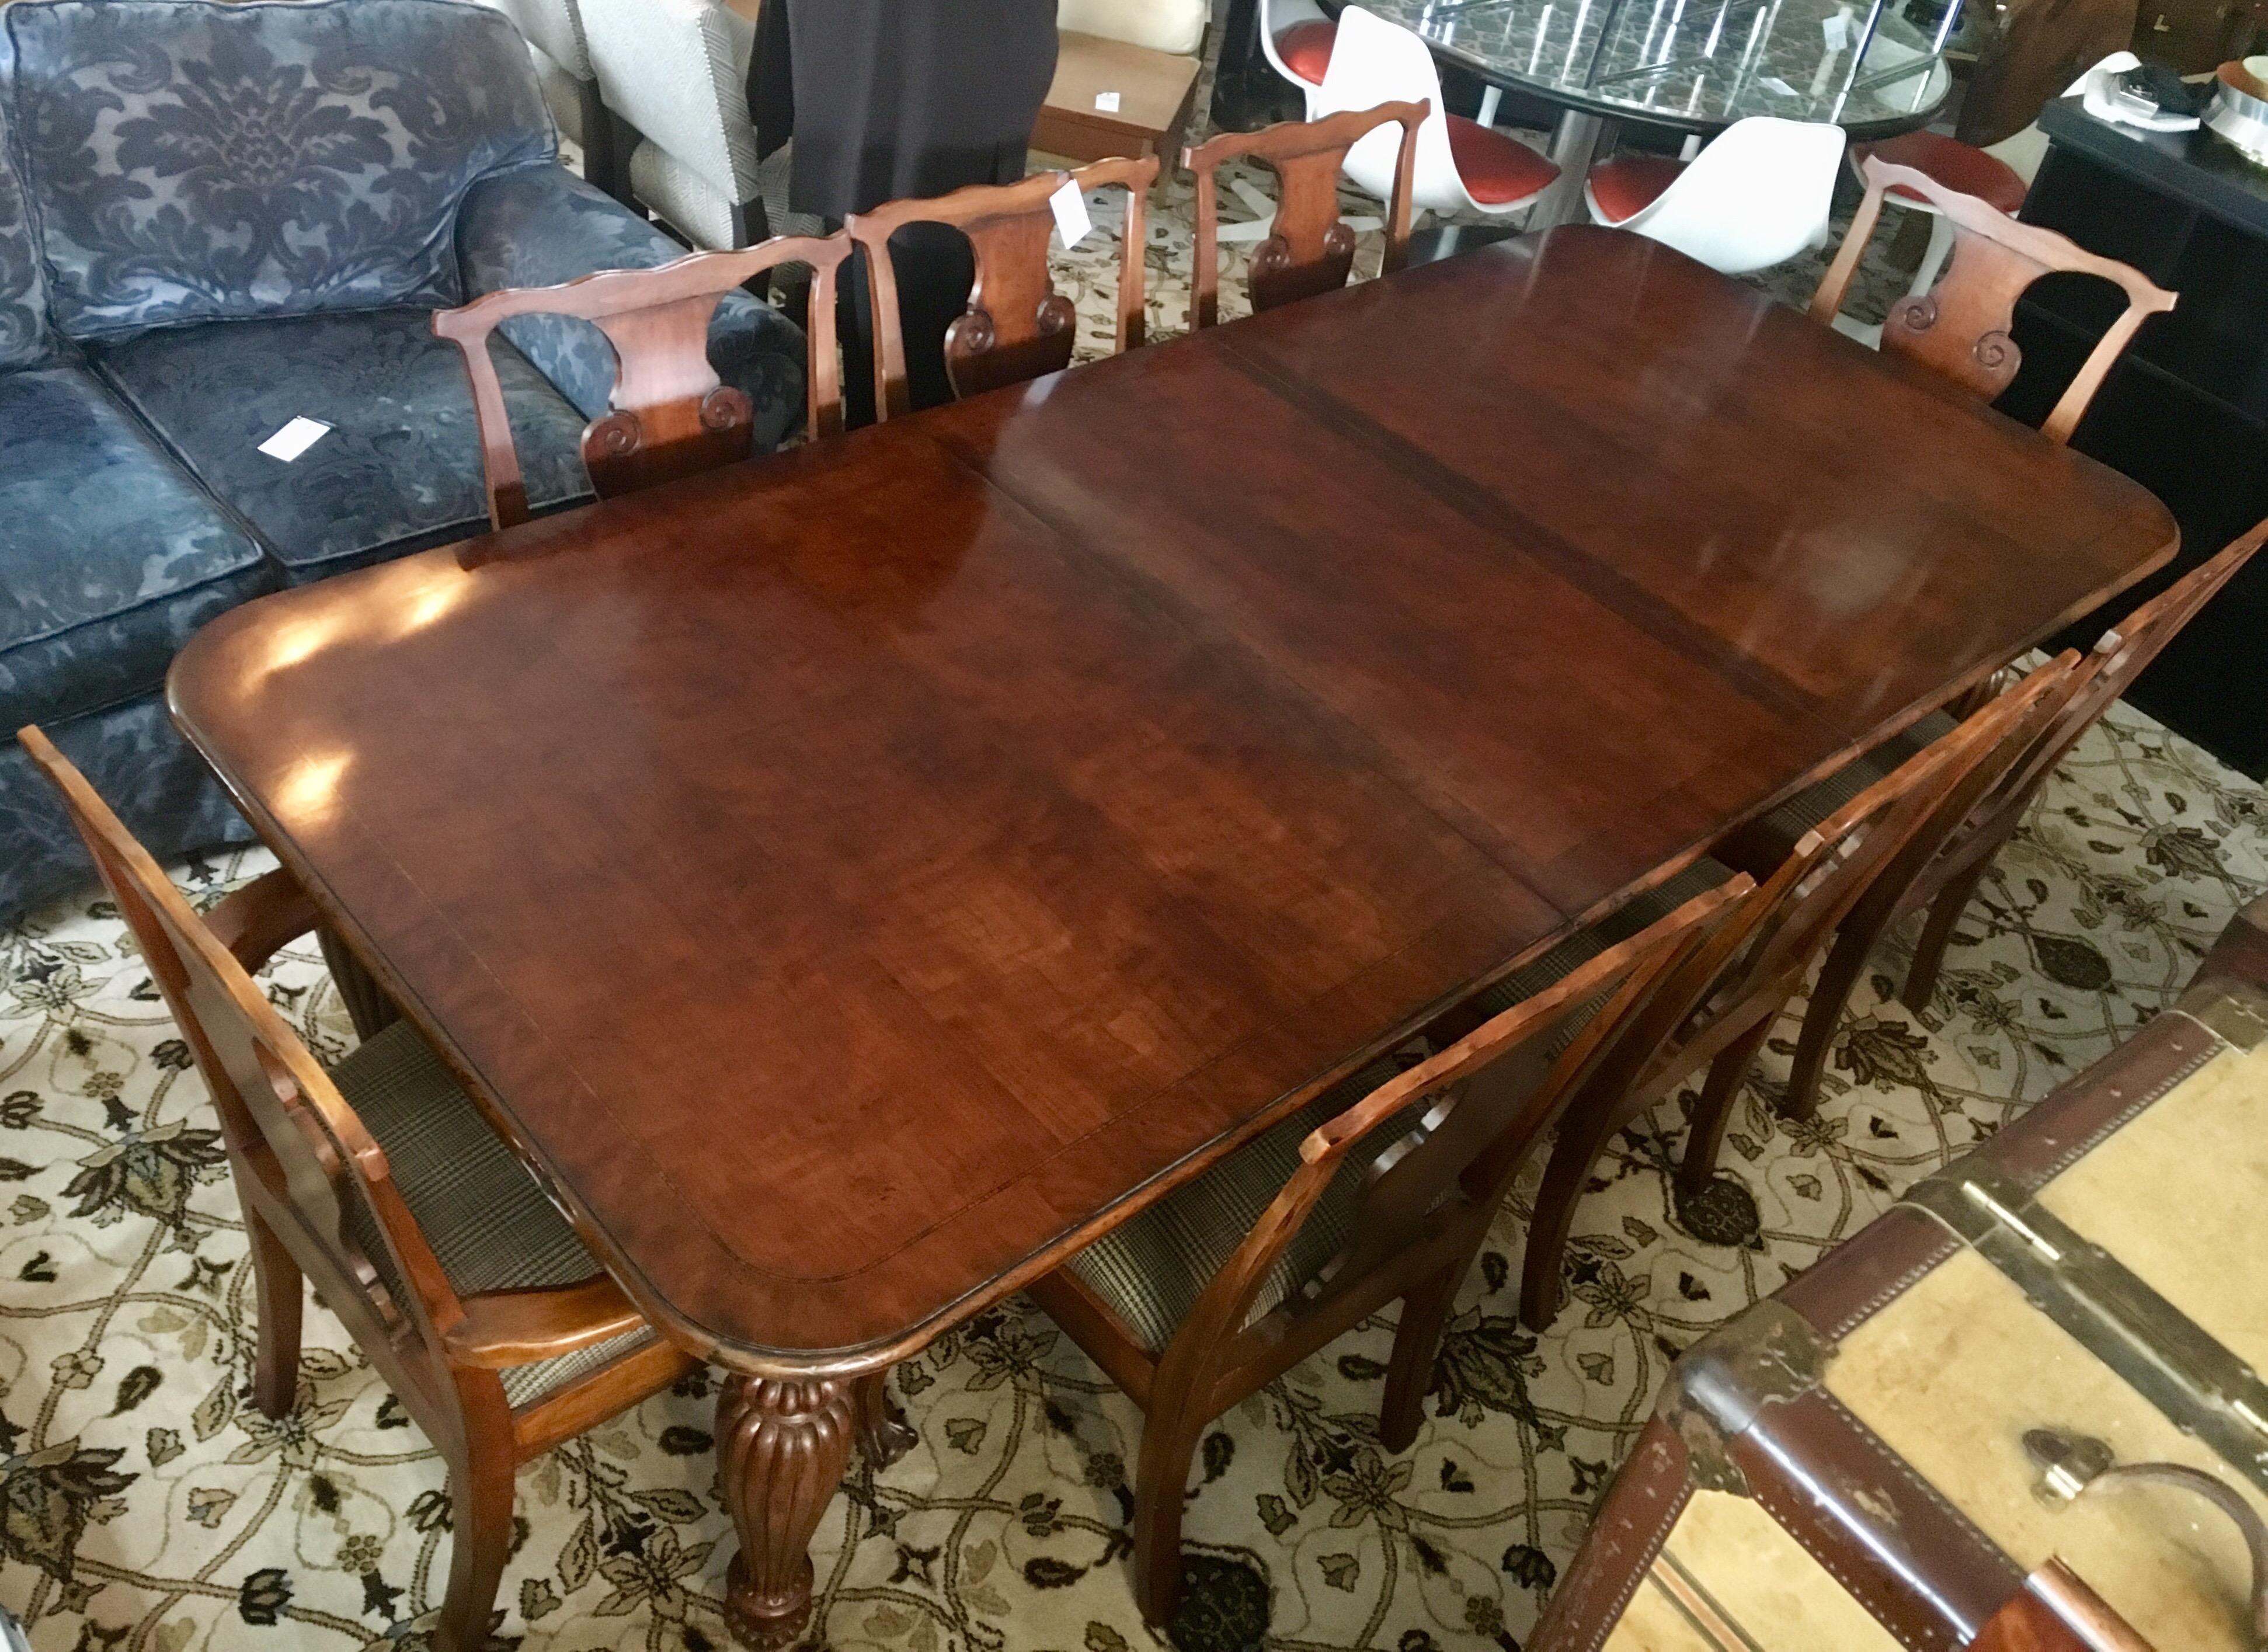 Elegant and sought after Ralph Lauren mahogany dining room table and matching chairs.
The table is expandable with its two twenty two inch leaves. It can go from 79